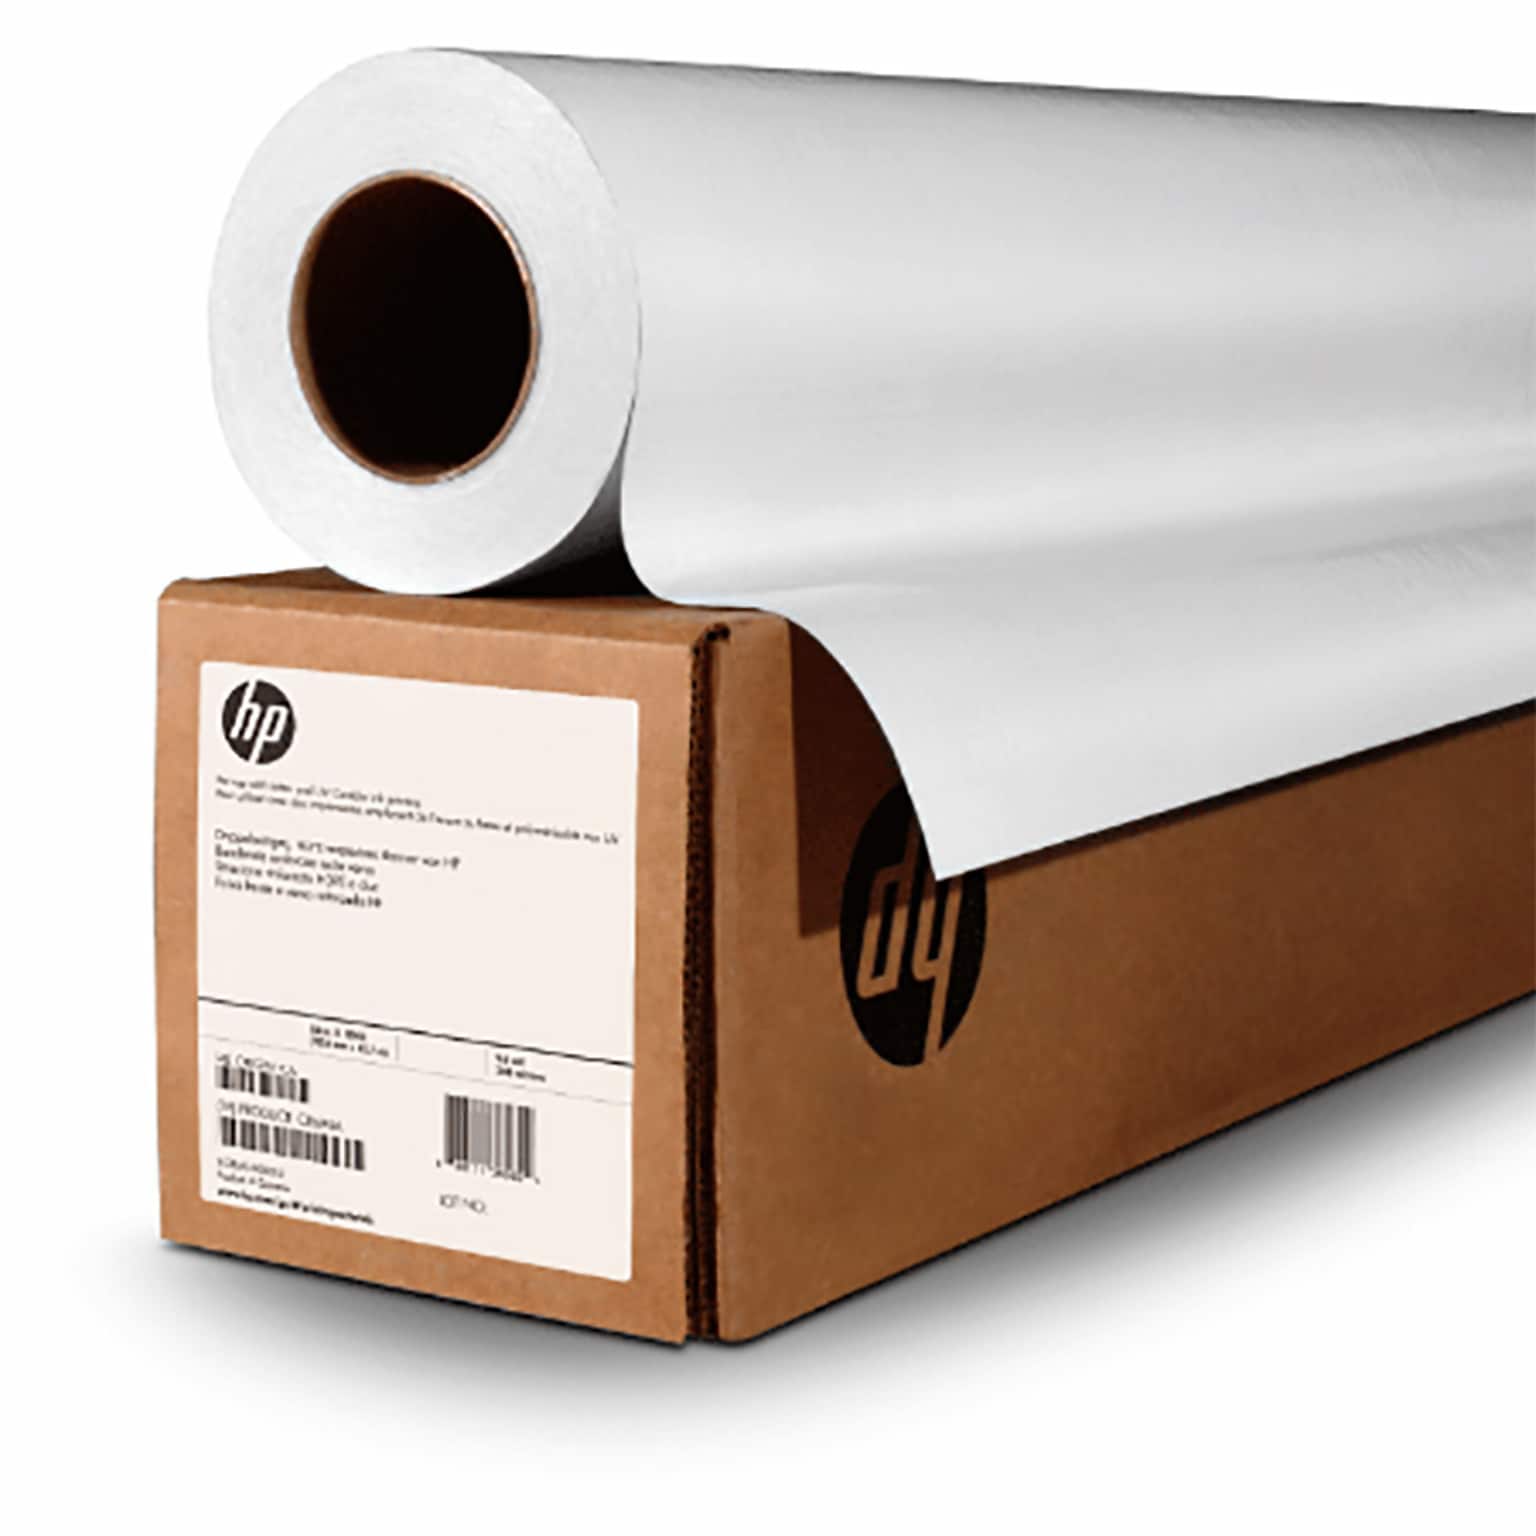 HP Universal Wide Format Production Paper, 36 x 200, Matte Finish (2MY98A)